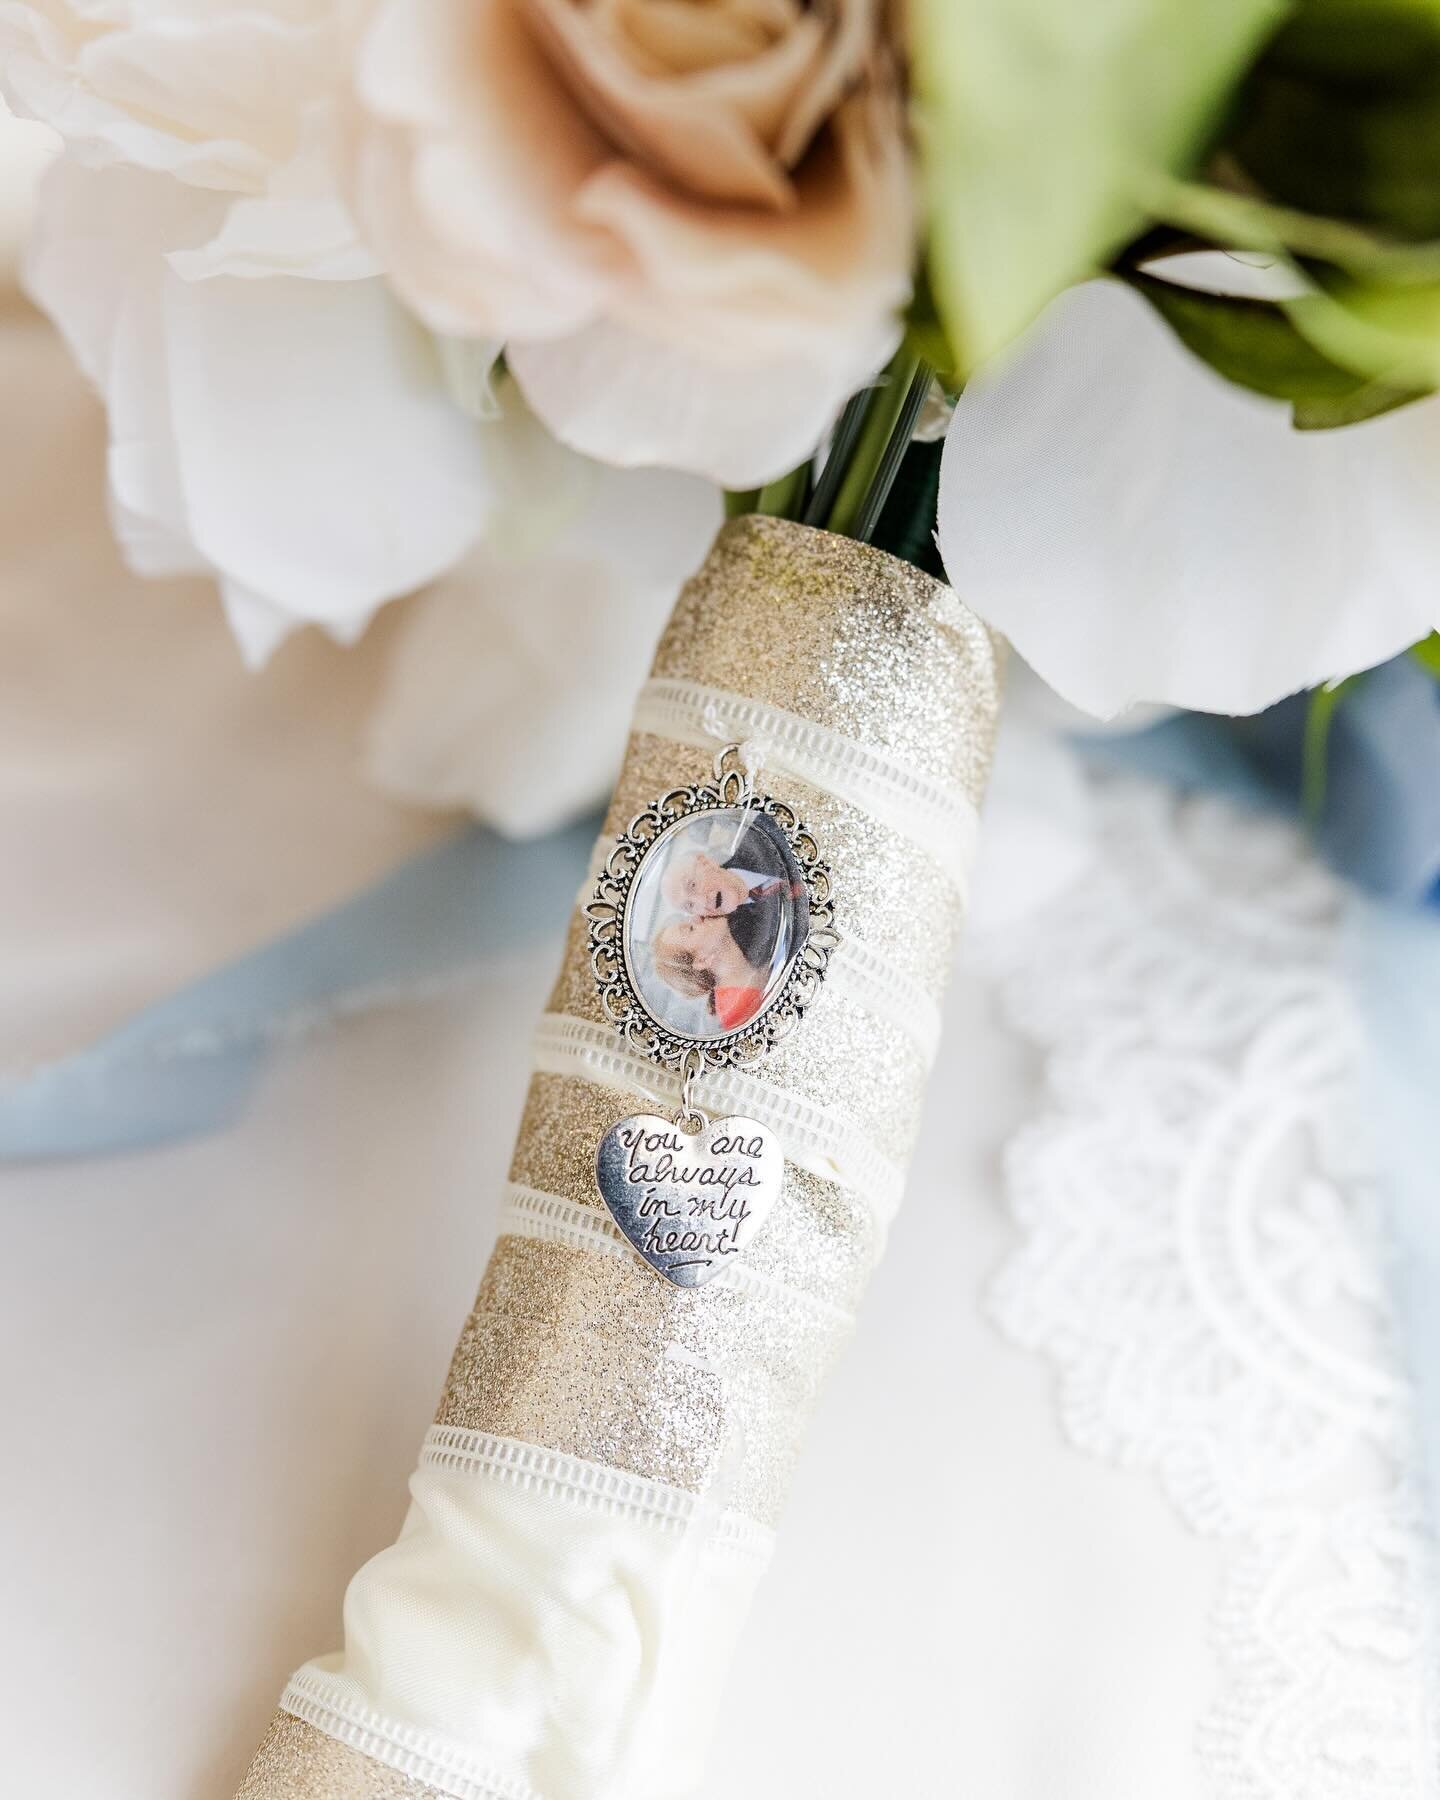 I love photographing details💕it gives me a glimpse of what is important to you and your life. Whether it&rsquo;s a wedding or newborn nursery, detail shots are some of my favorite to get! 

2nd shot for @emilypersonphotography